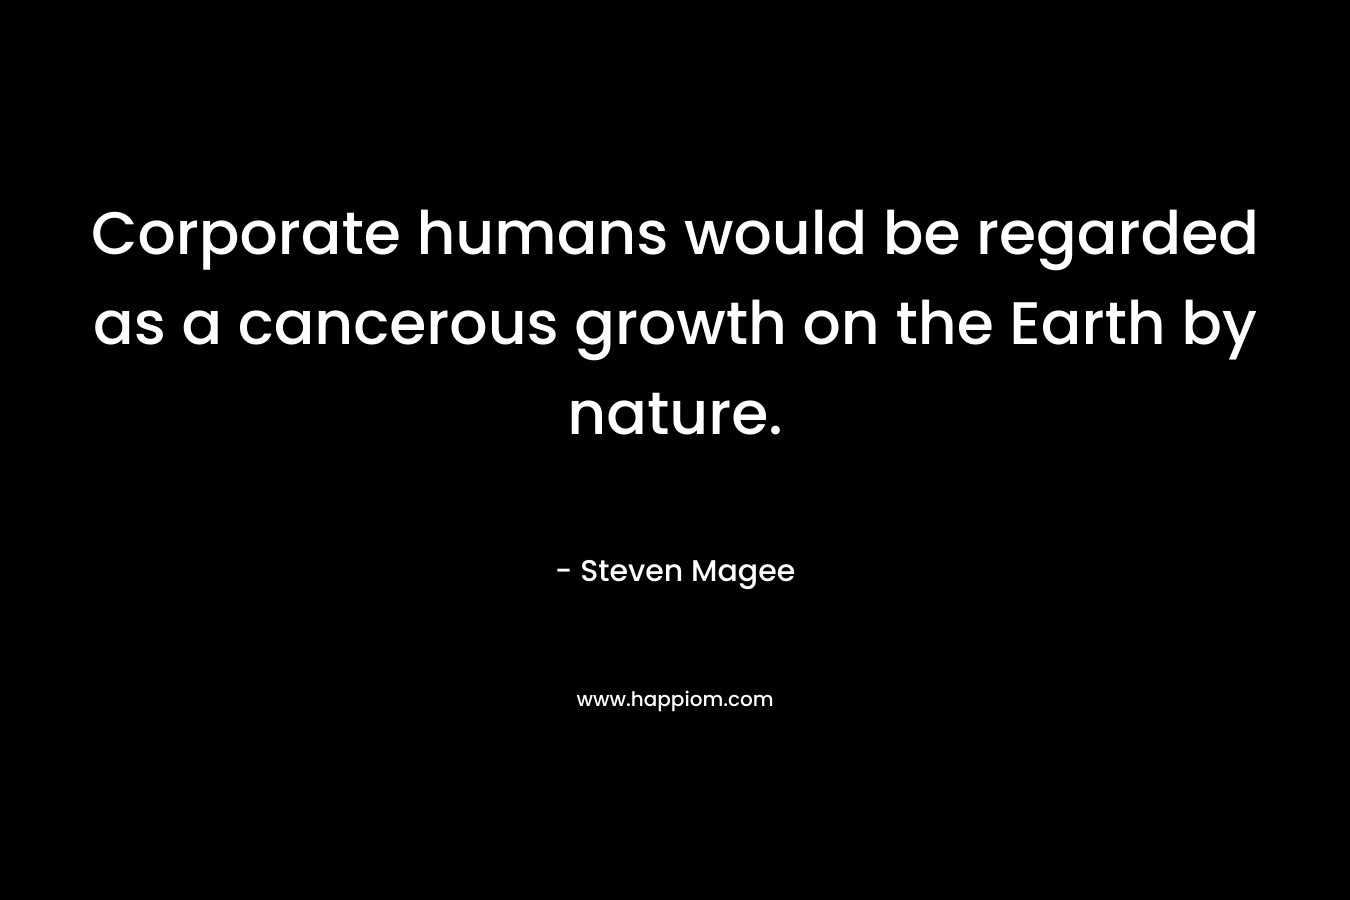 Corporate humans would be regarded as a cancerous growth on the Earth by nature.